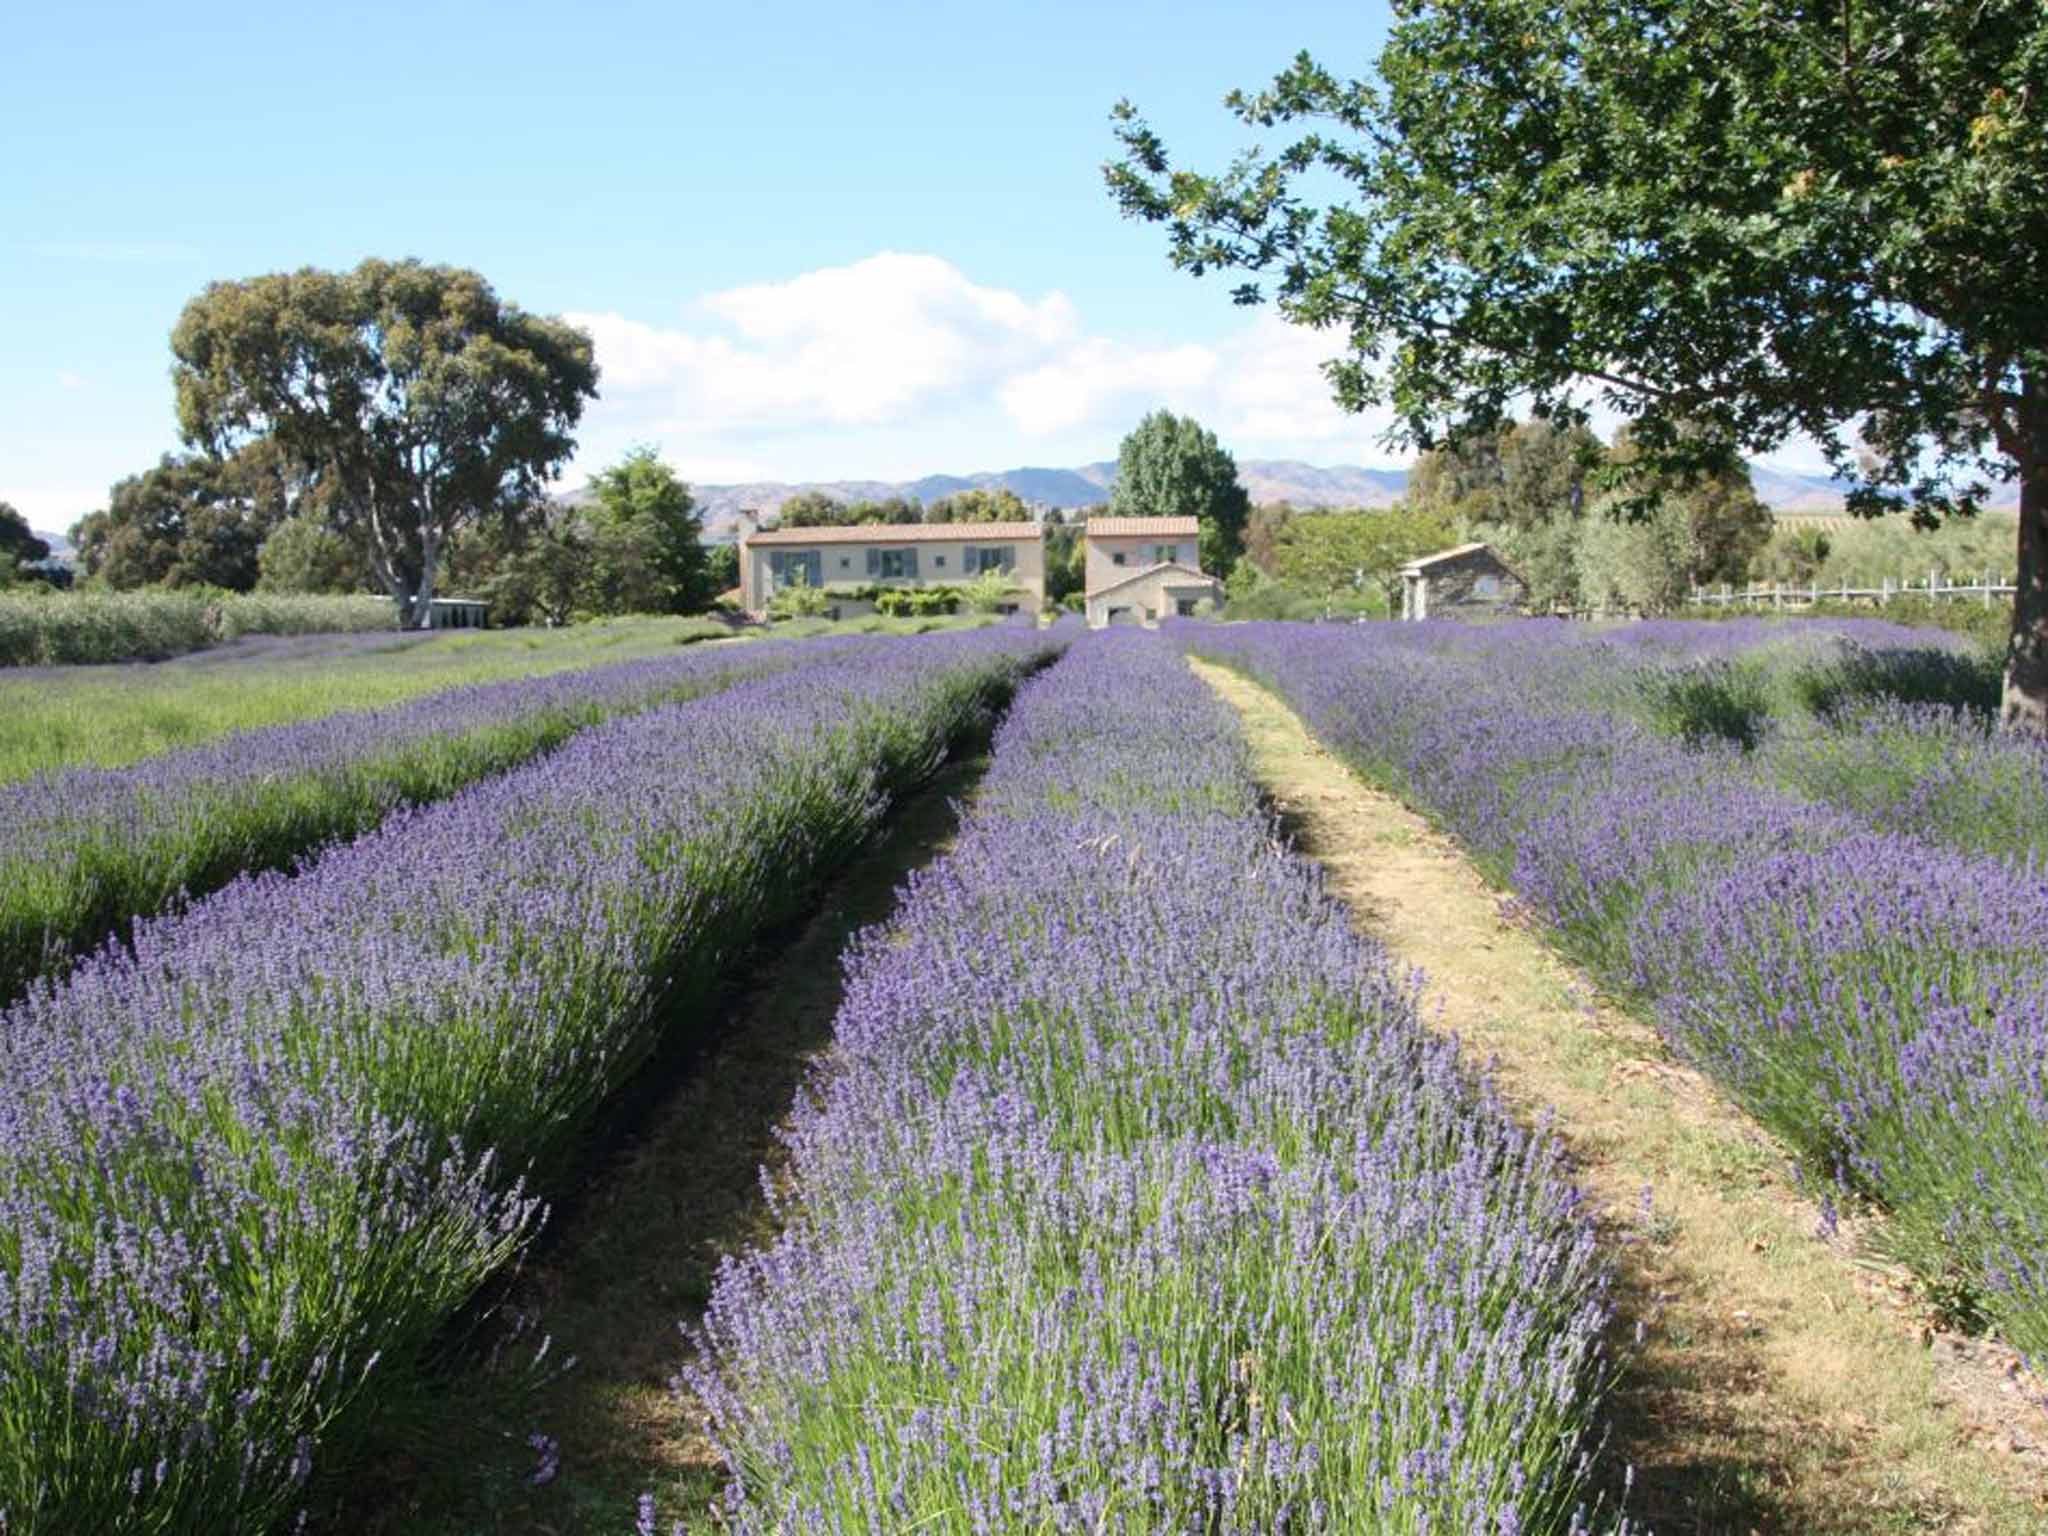 New Zealand's fragrant lavender farms: Heavenly scents and local